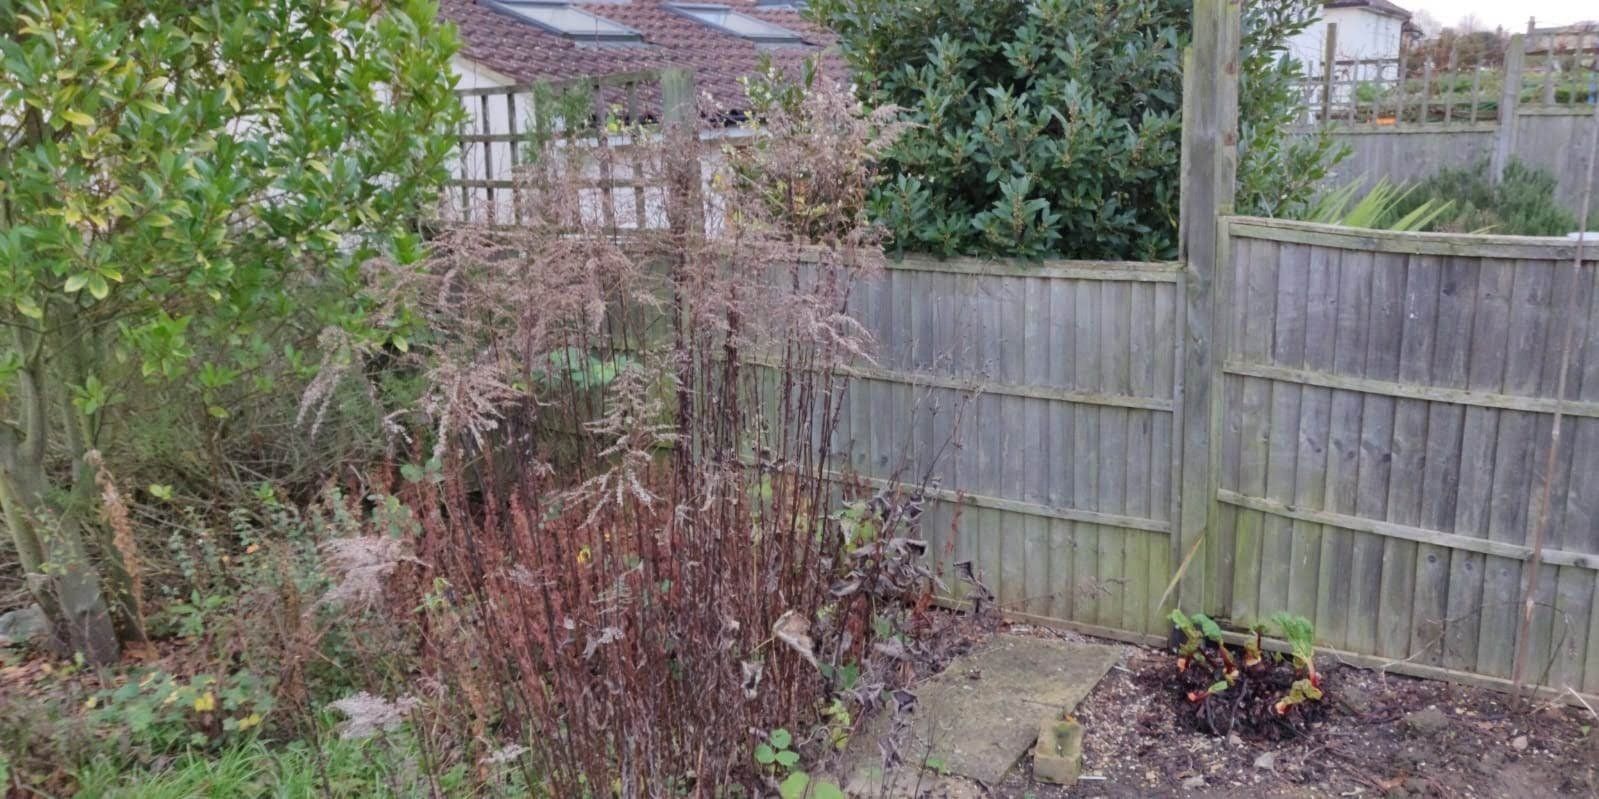 Broken fence needing much repair with missing trelliss top